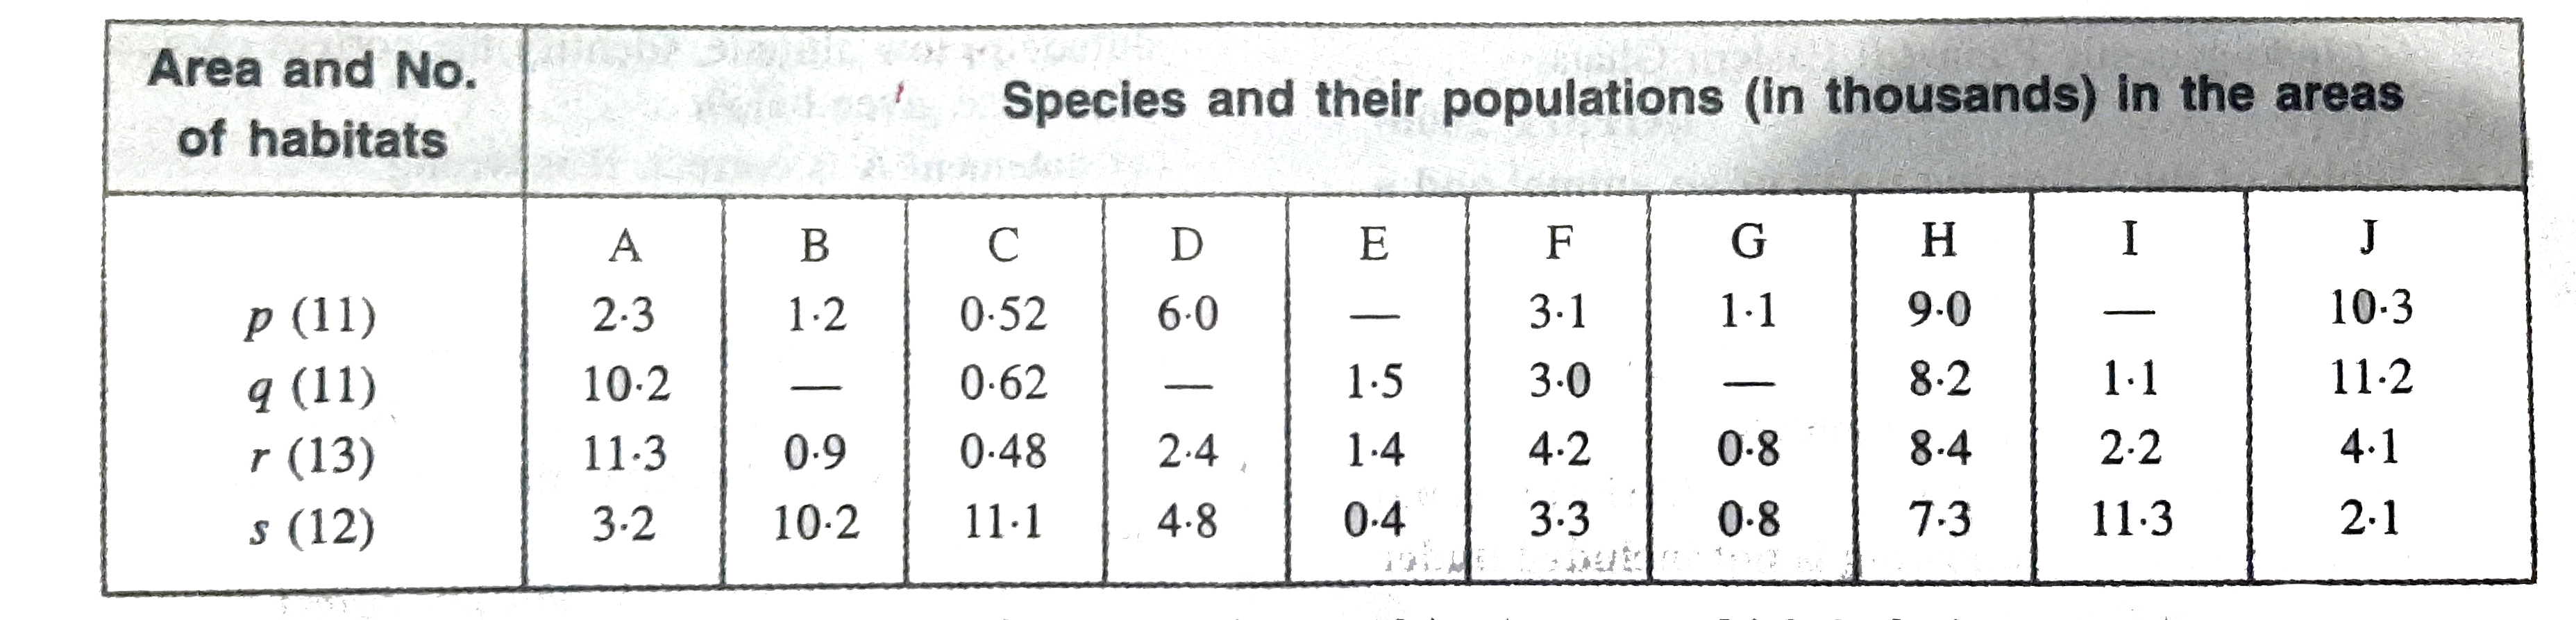 The table  below  gives  the population  ( in thousands) of  ten species (A-J) in four  areas (a-d) consisting  of the number  of habitats given  within brackets  against each. Study the table  and answer the questions  which follow.       Which area out of  a-d  shows maximum species diversity ?